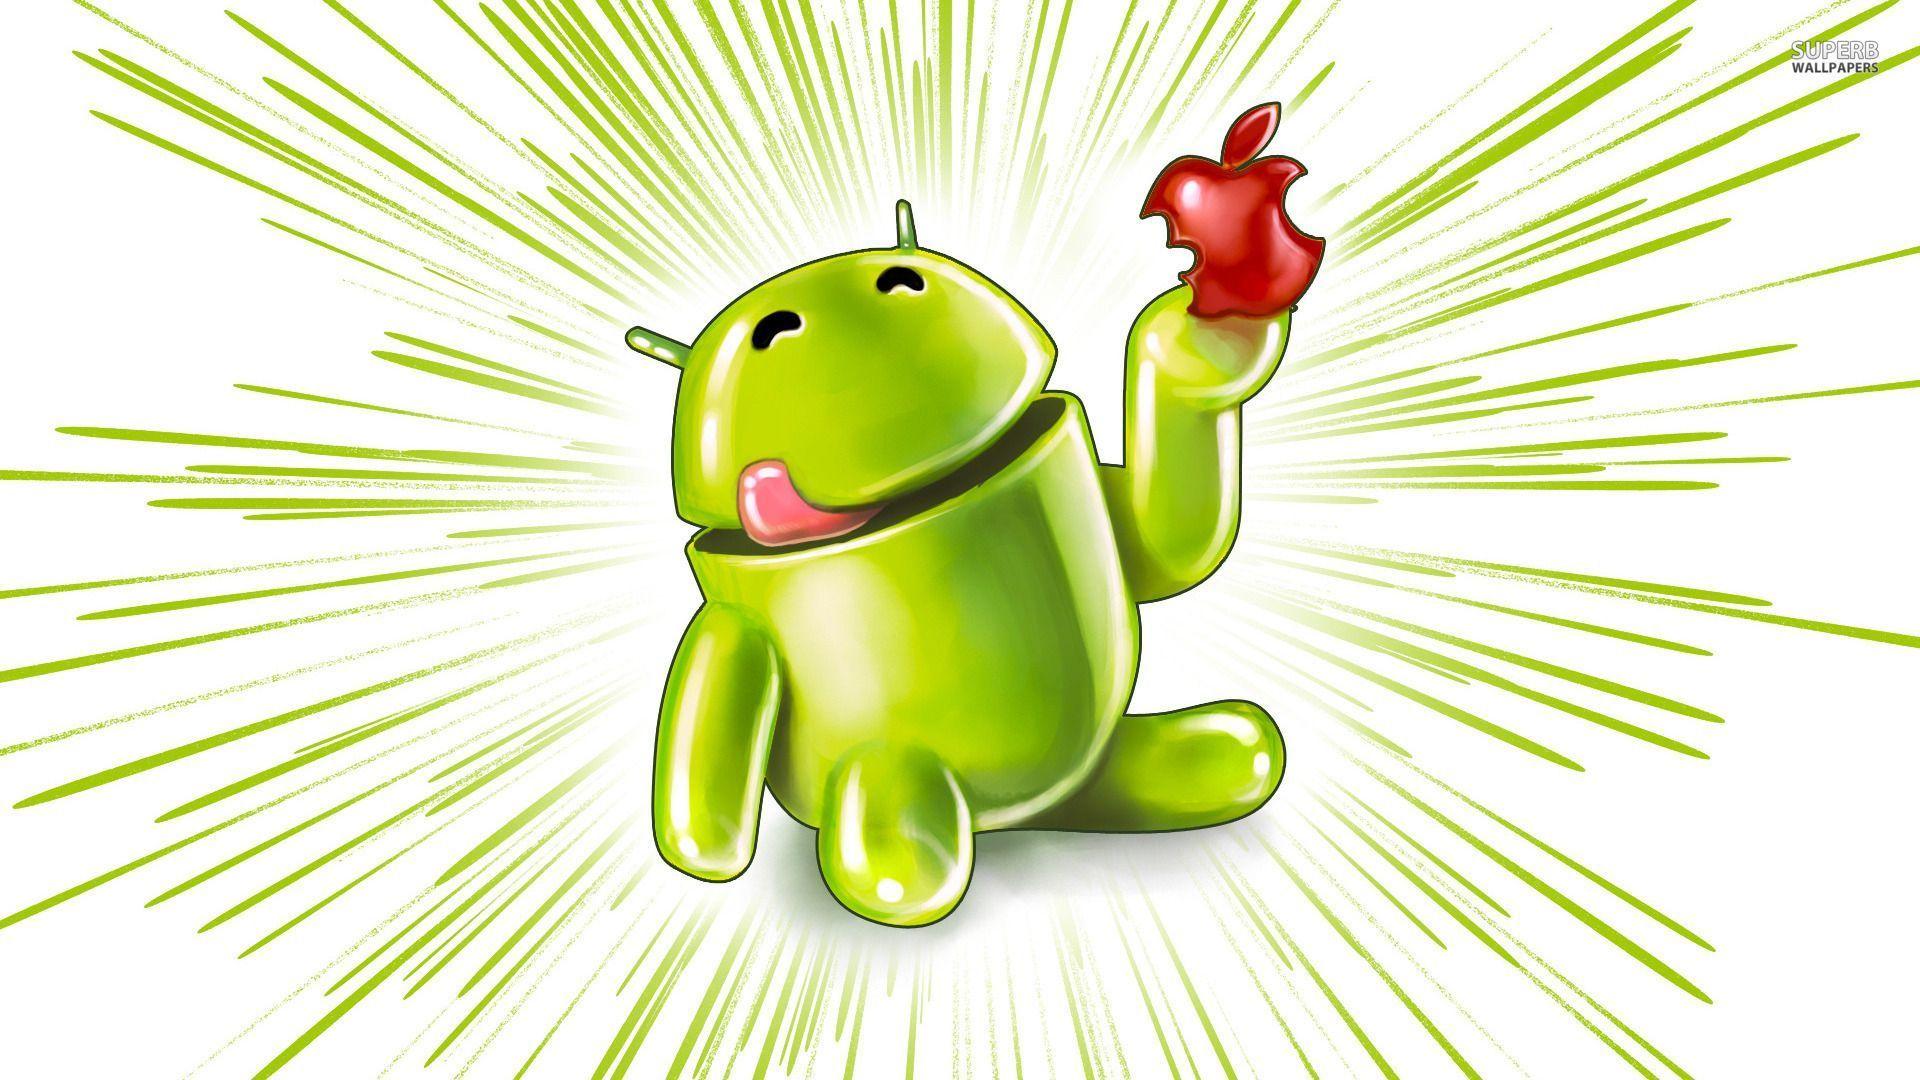 Android eating an Apple wallpaper